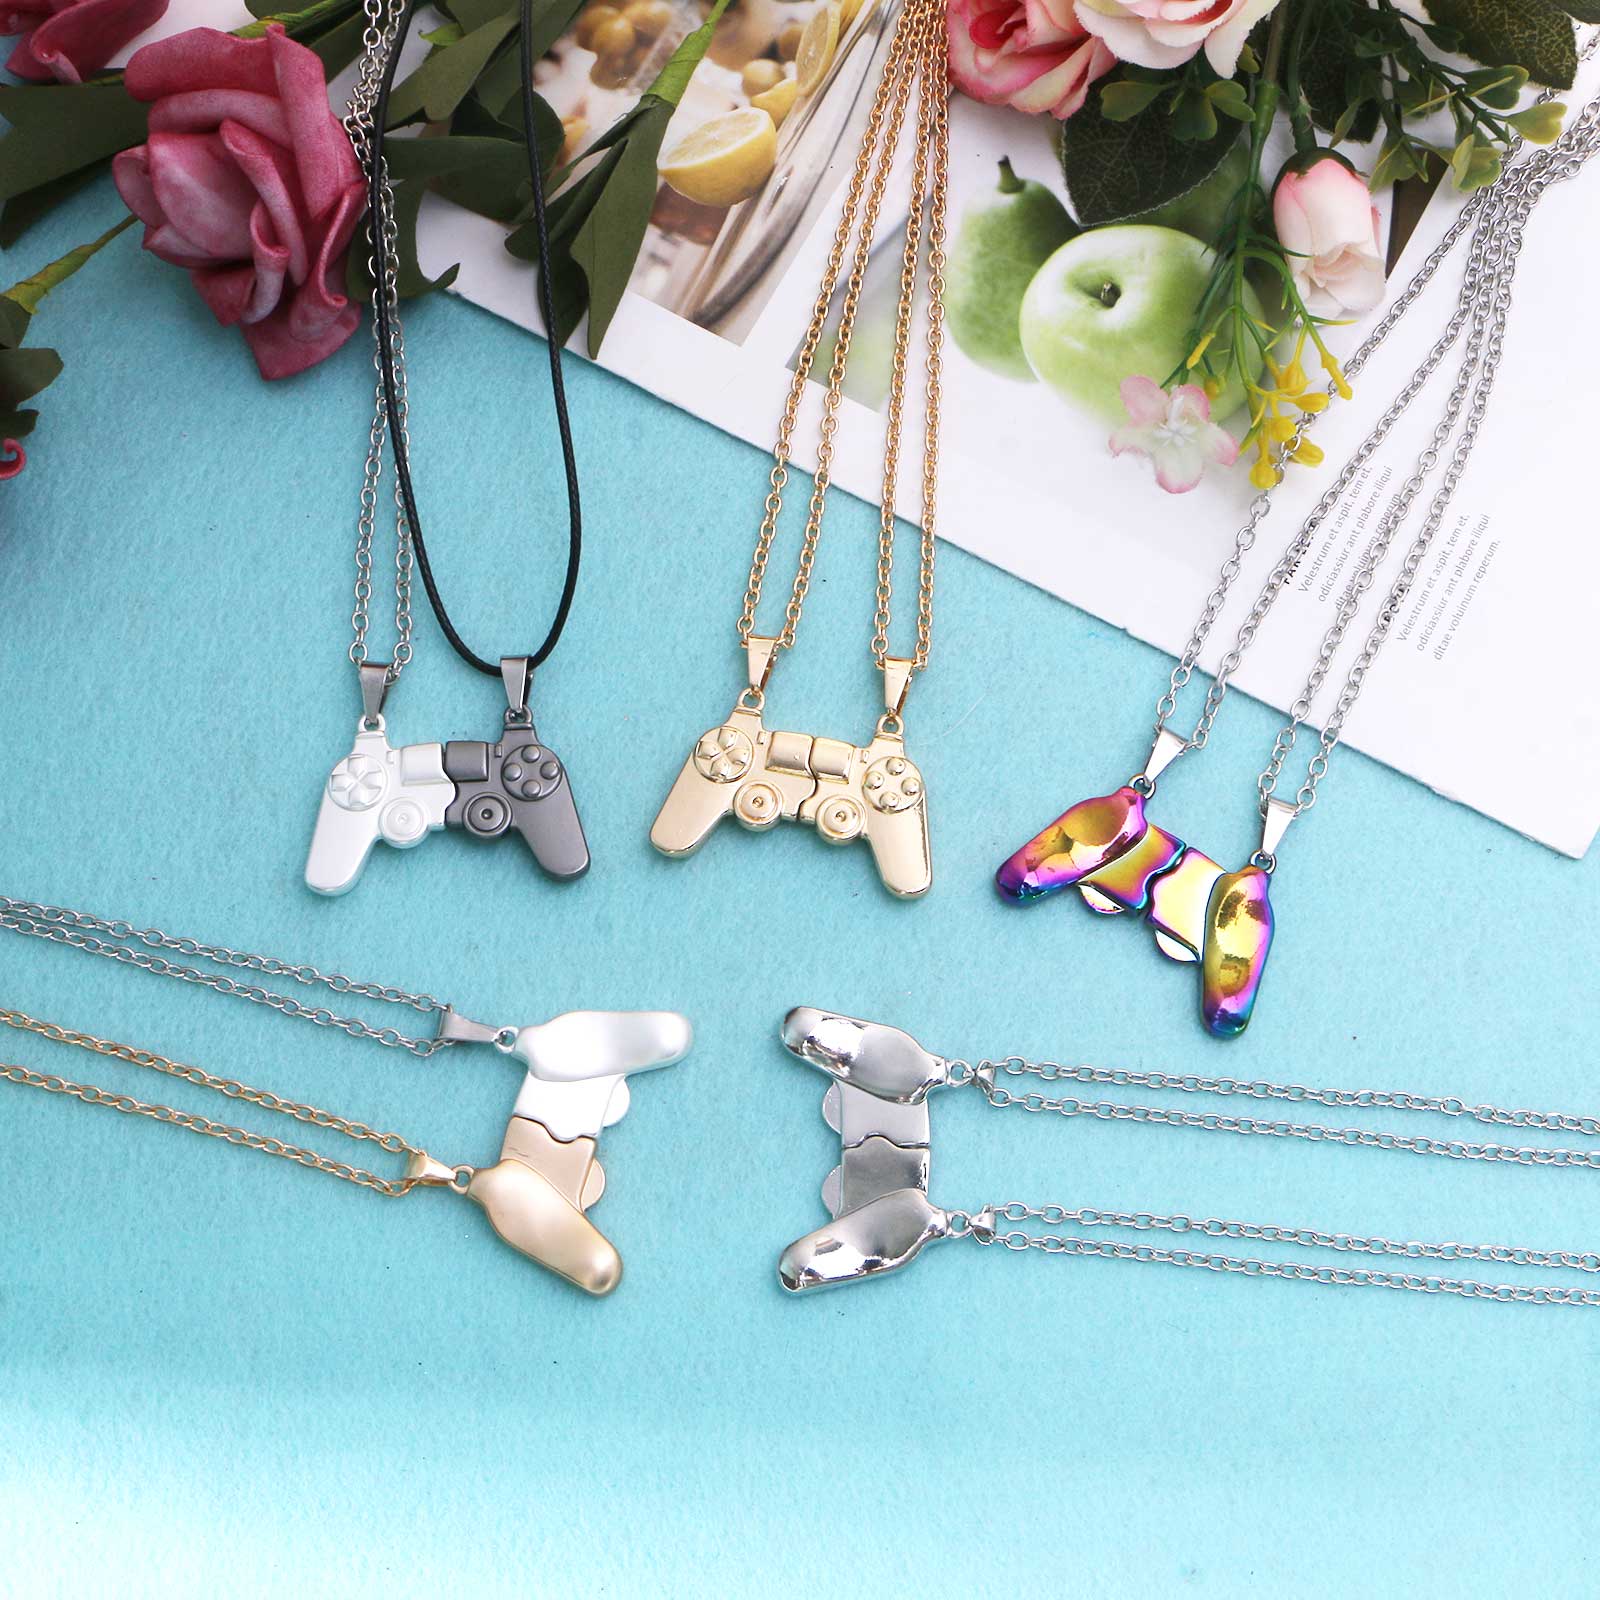 2 Pcs/set Couple BFF Matching Magnet Necklaces Game Controller